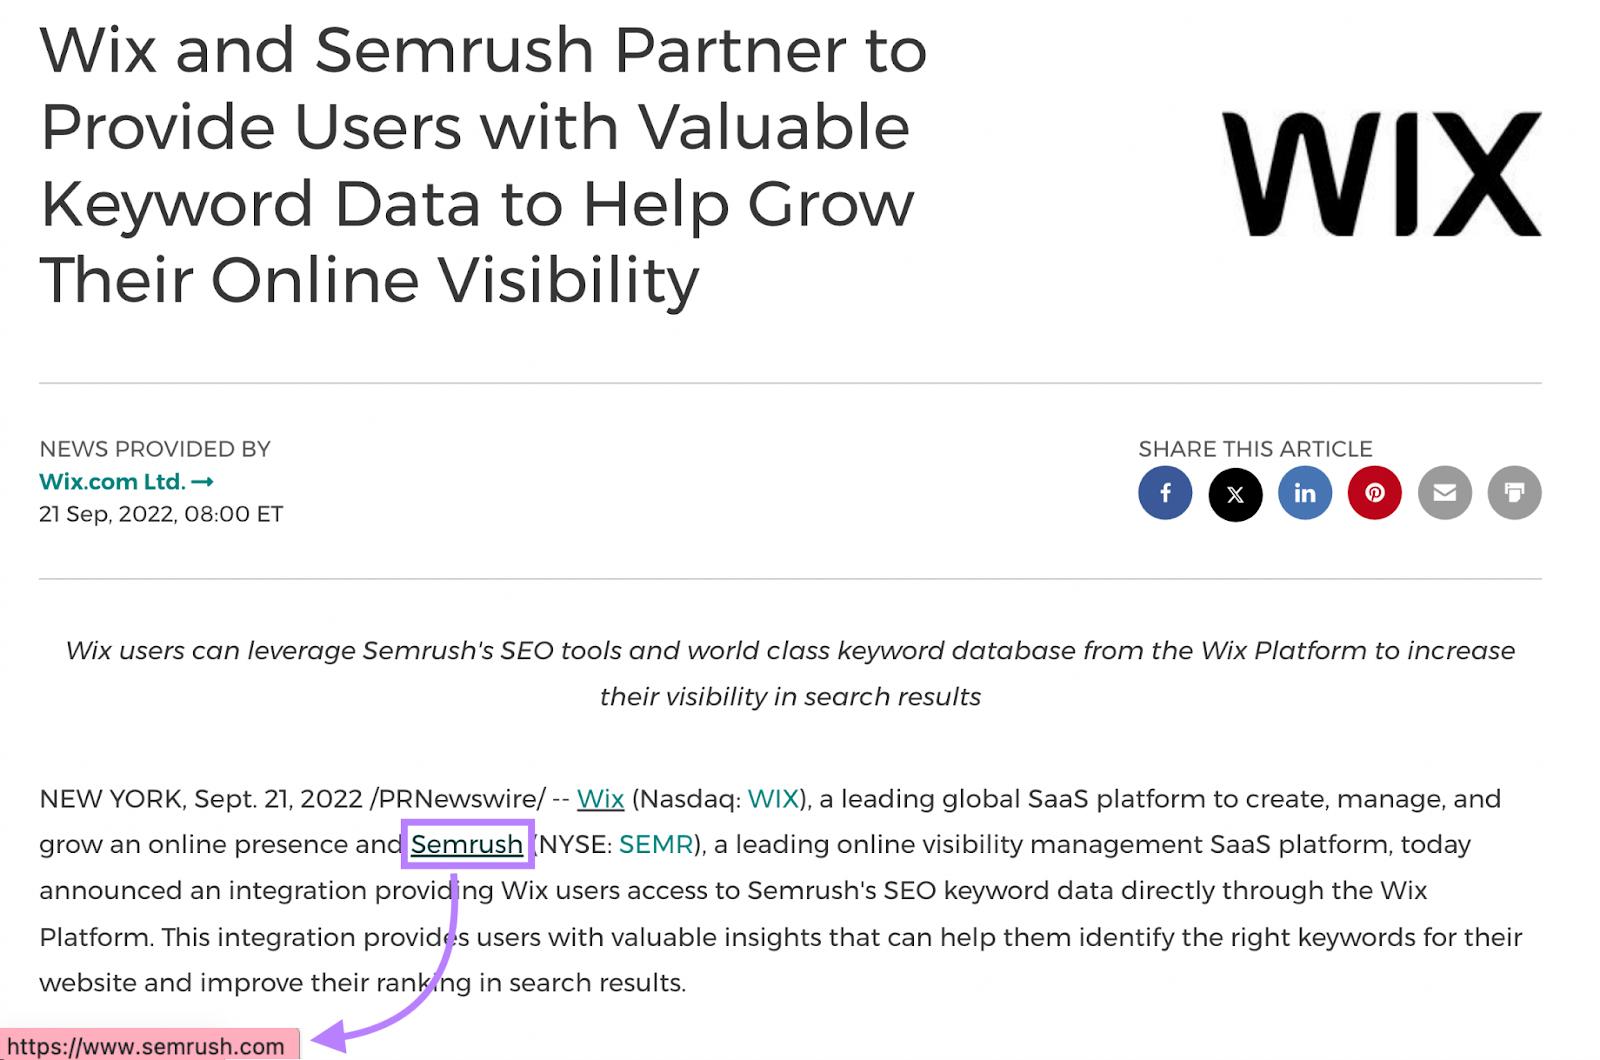 An example of a branded backlink to the Semrush website